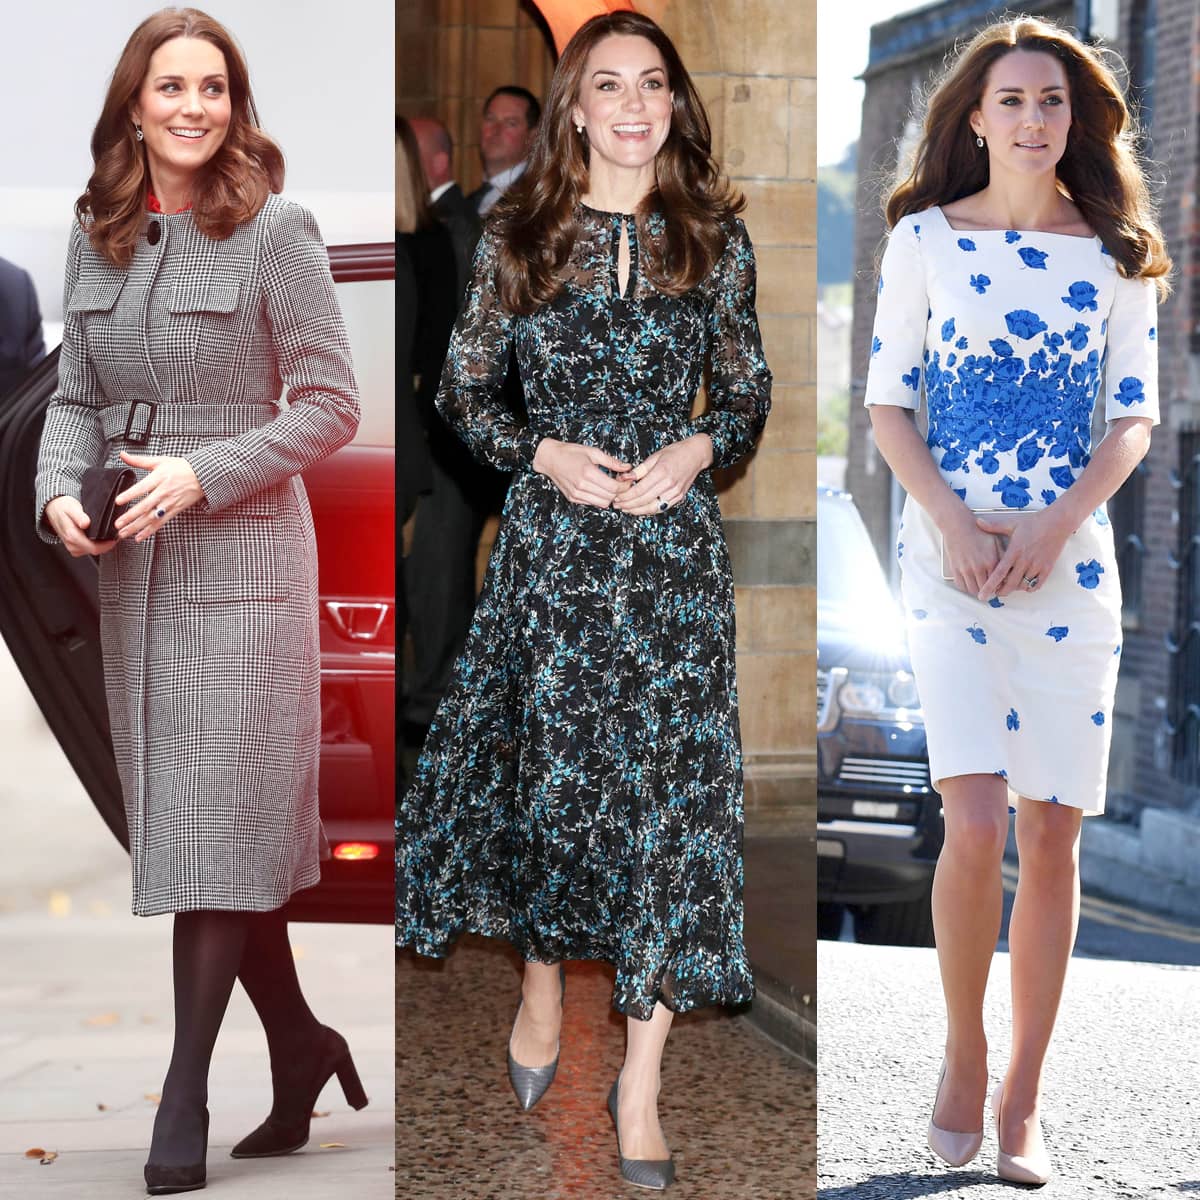 Kate Middleton's closet includes L.K. Bennett's floral dresses and classic coats